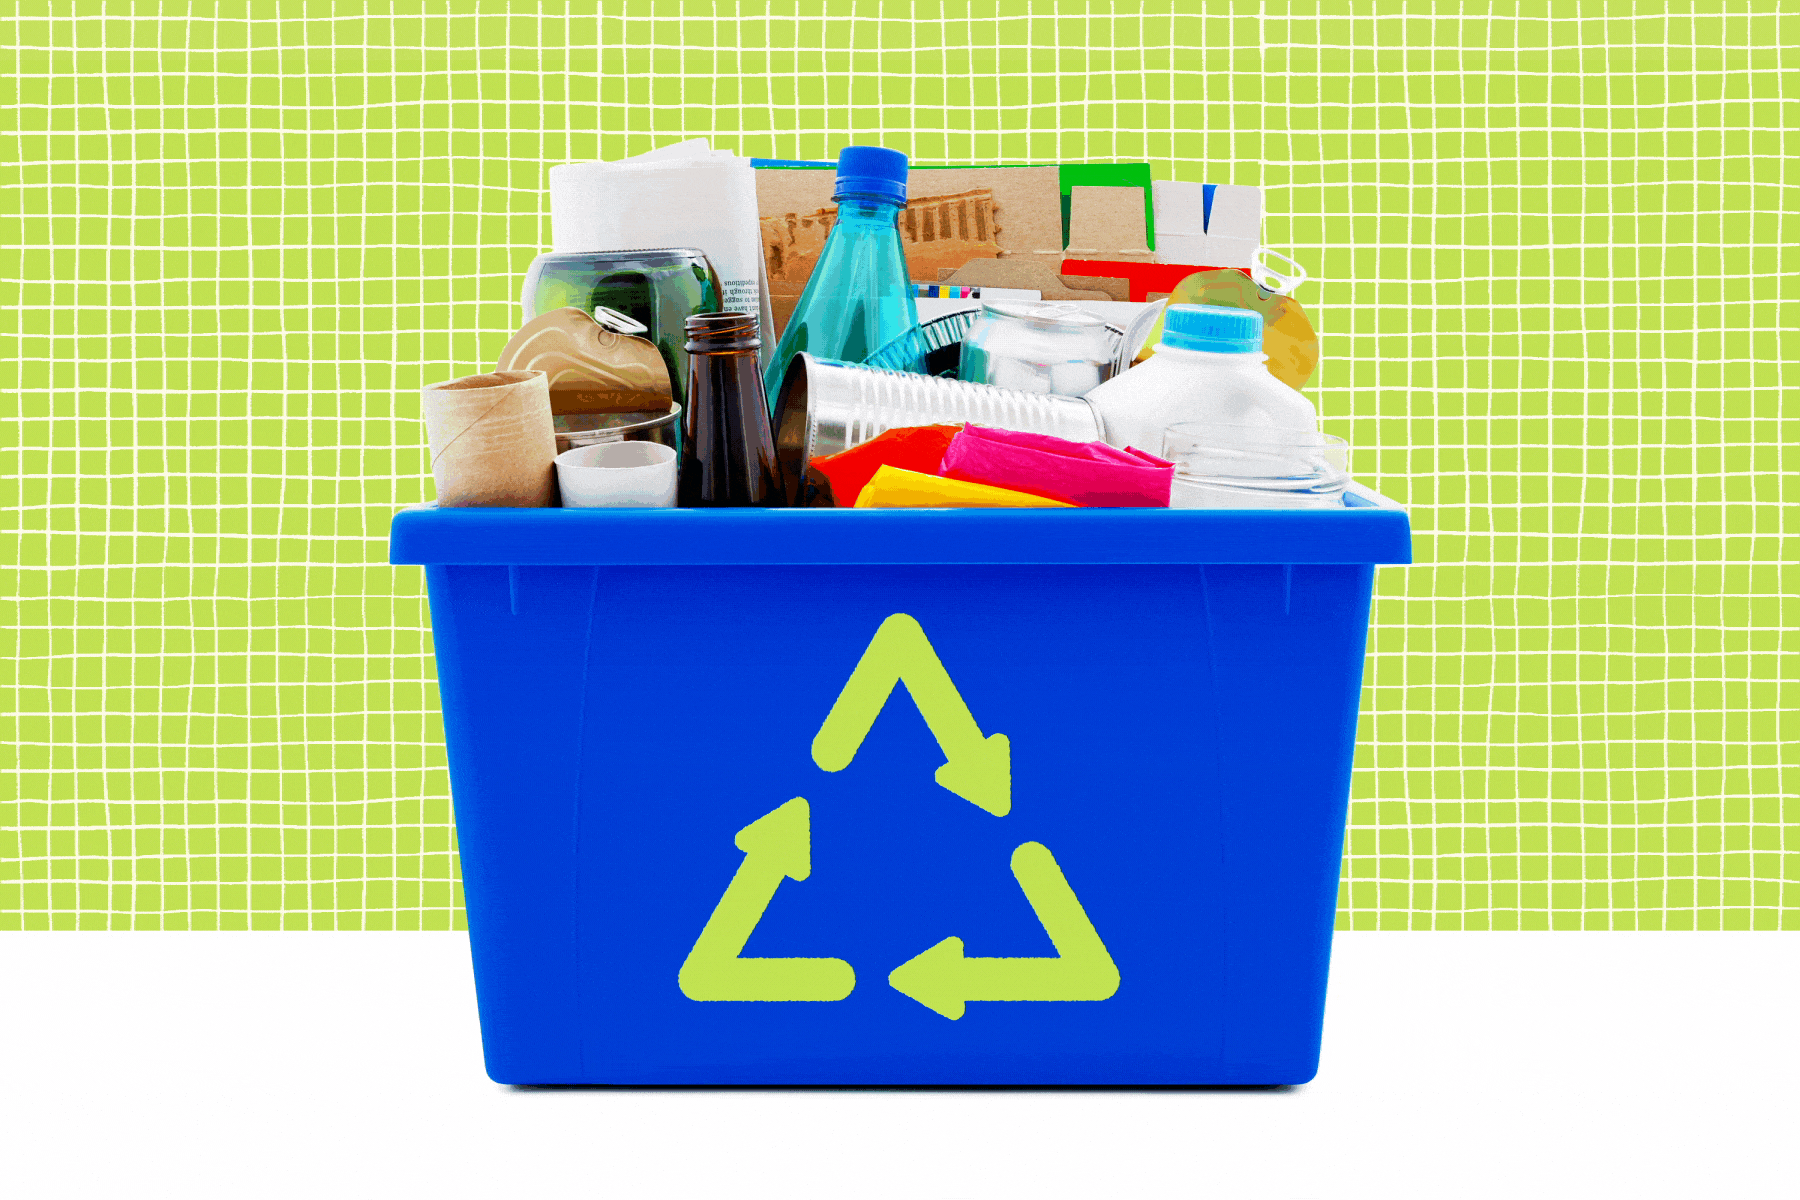 A blue recycling basket filled with items.